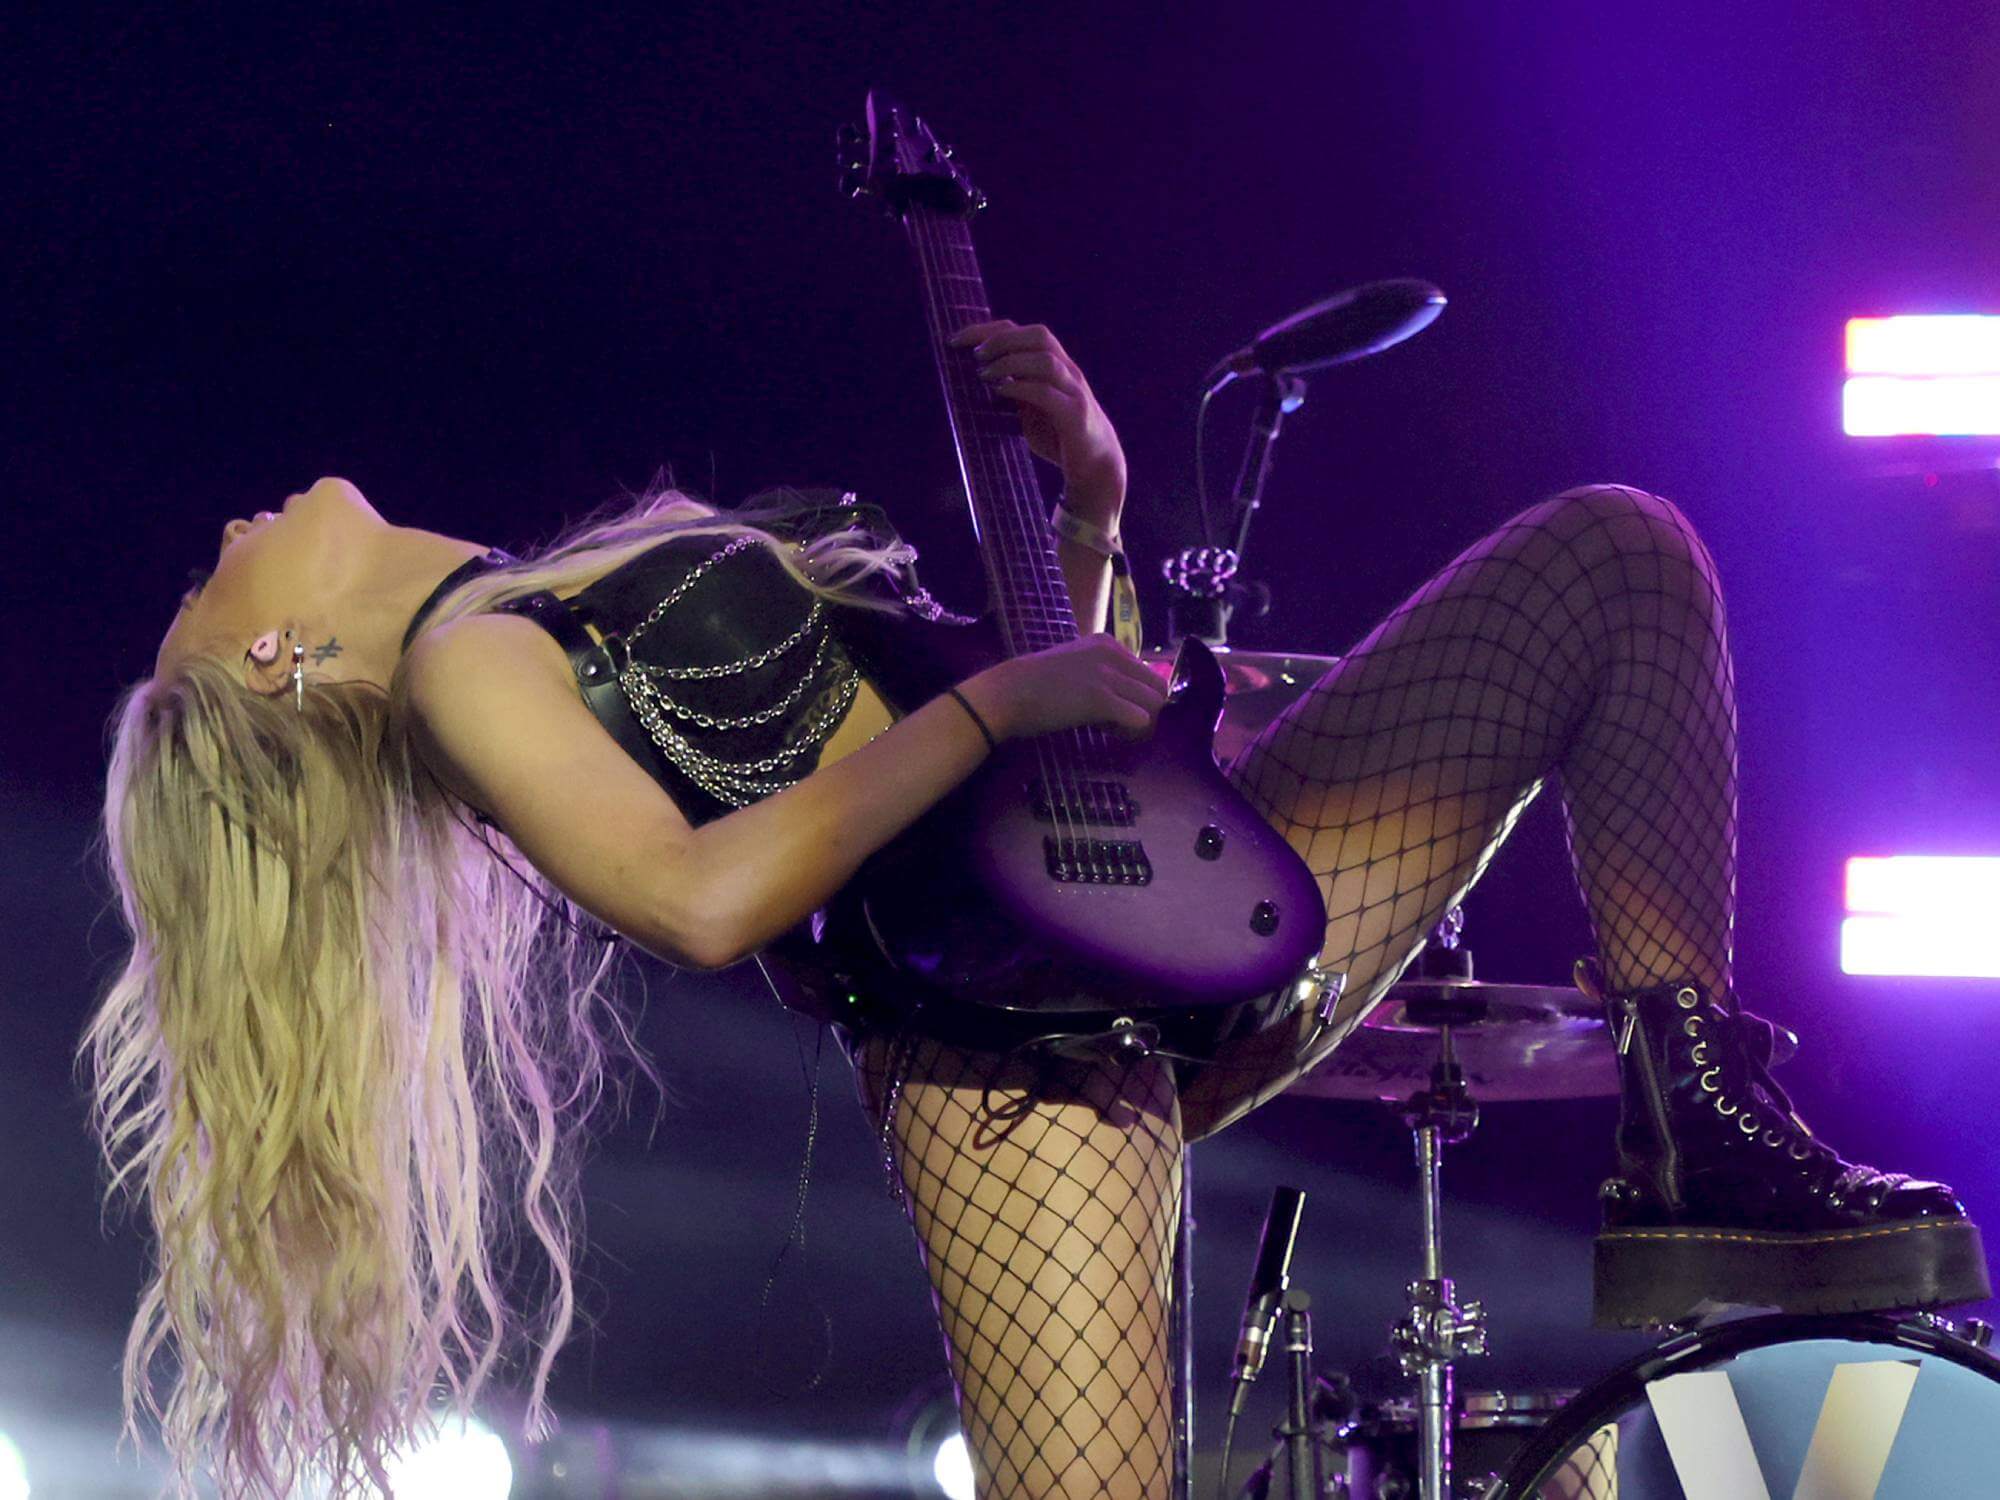 Sophie Lloyd playing guitar on stage. She has one foot placed on a drum kit and is leaning back as she is playing. She has long blonde hair which trails behind her.